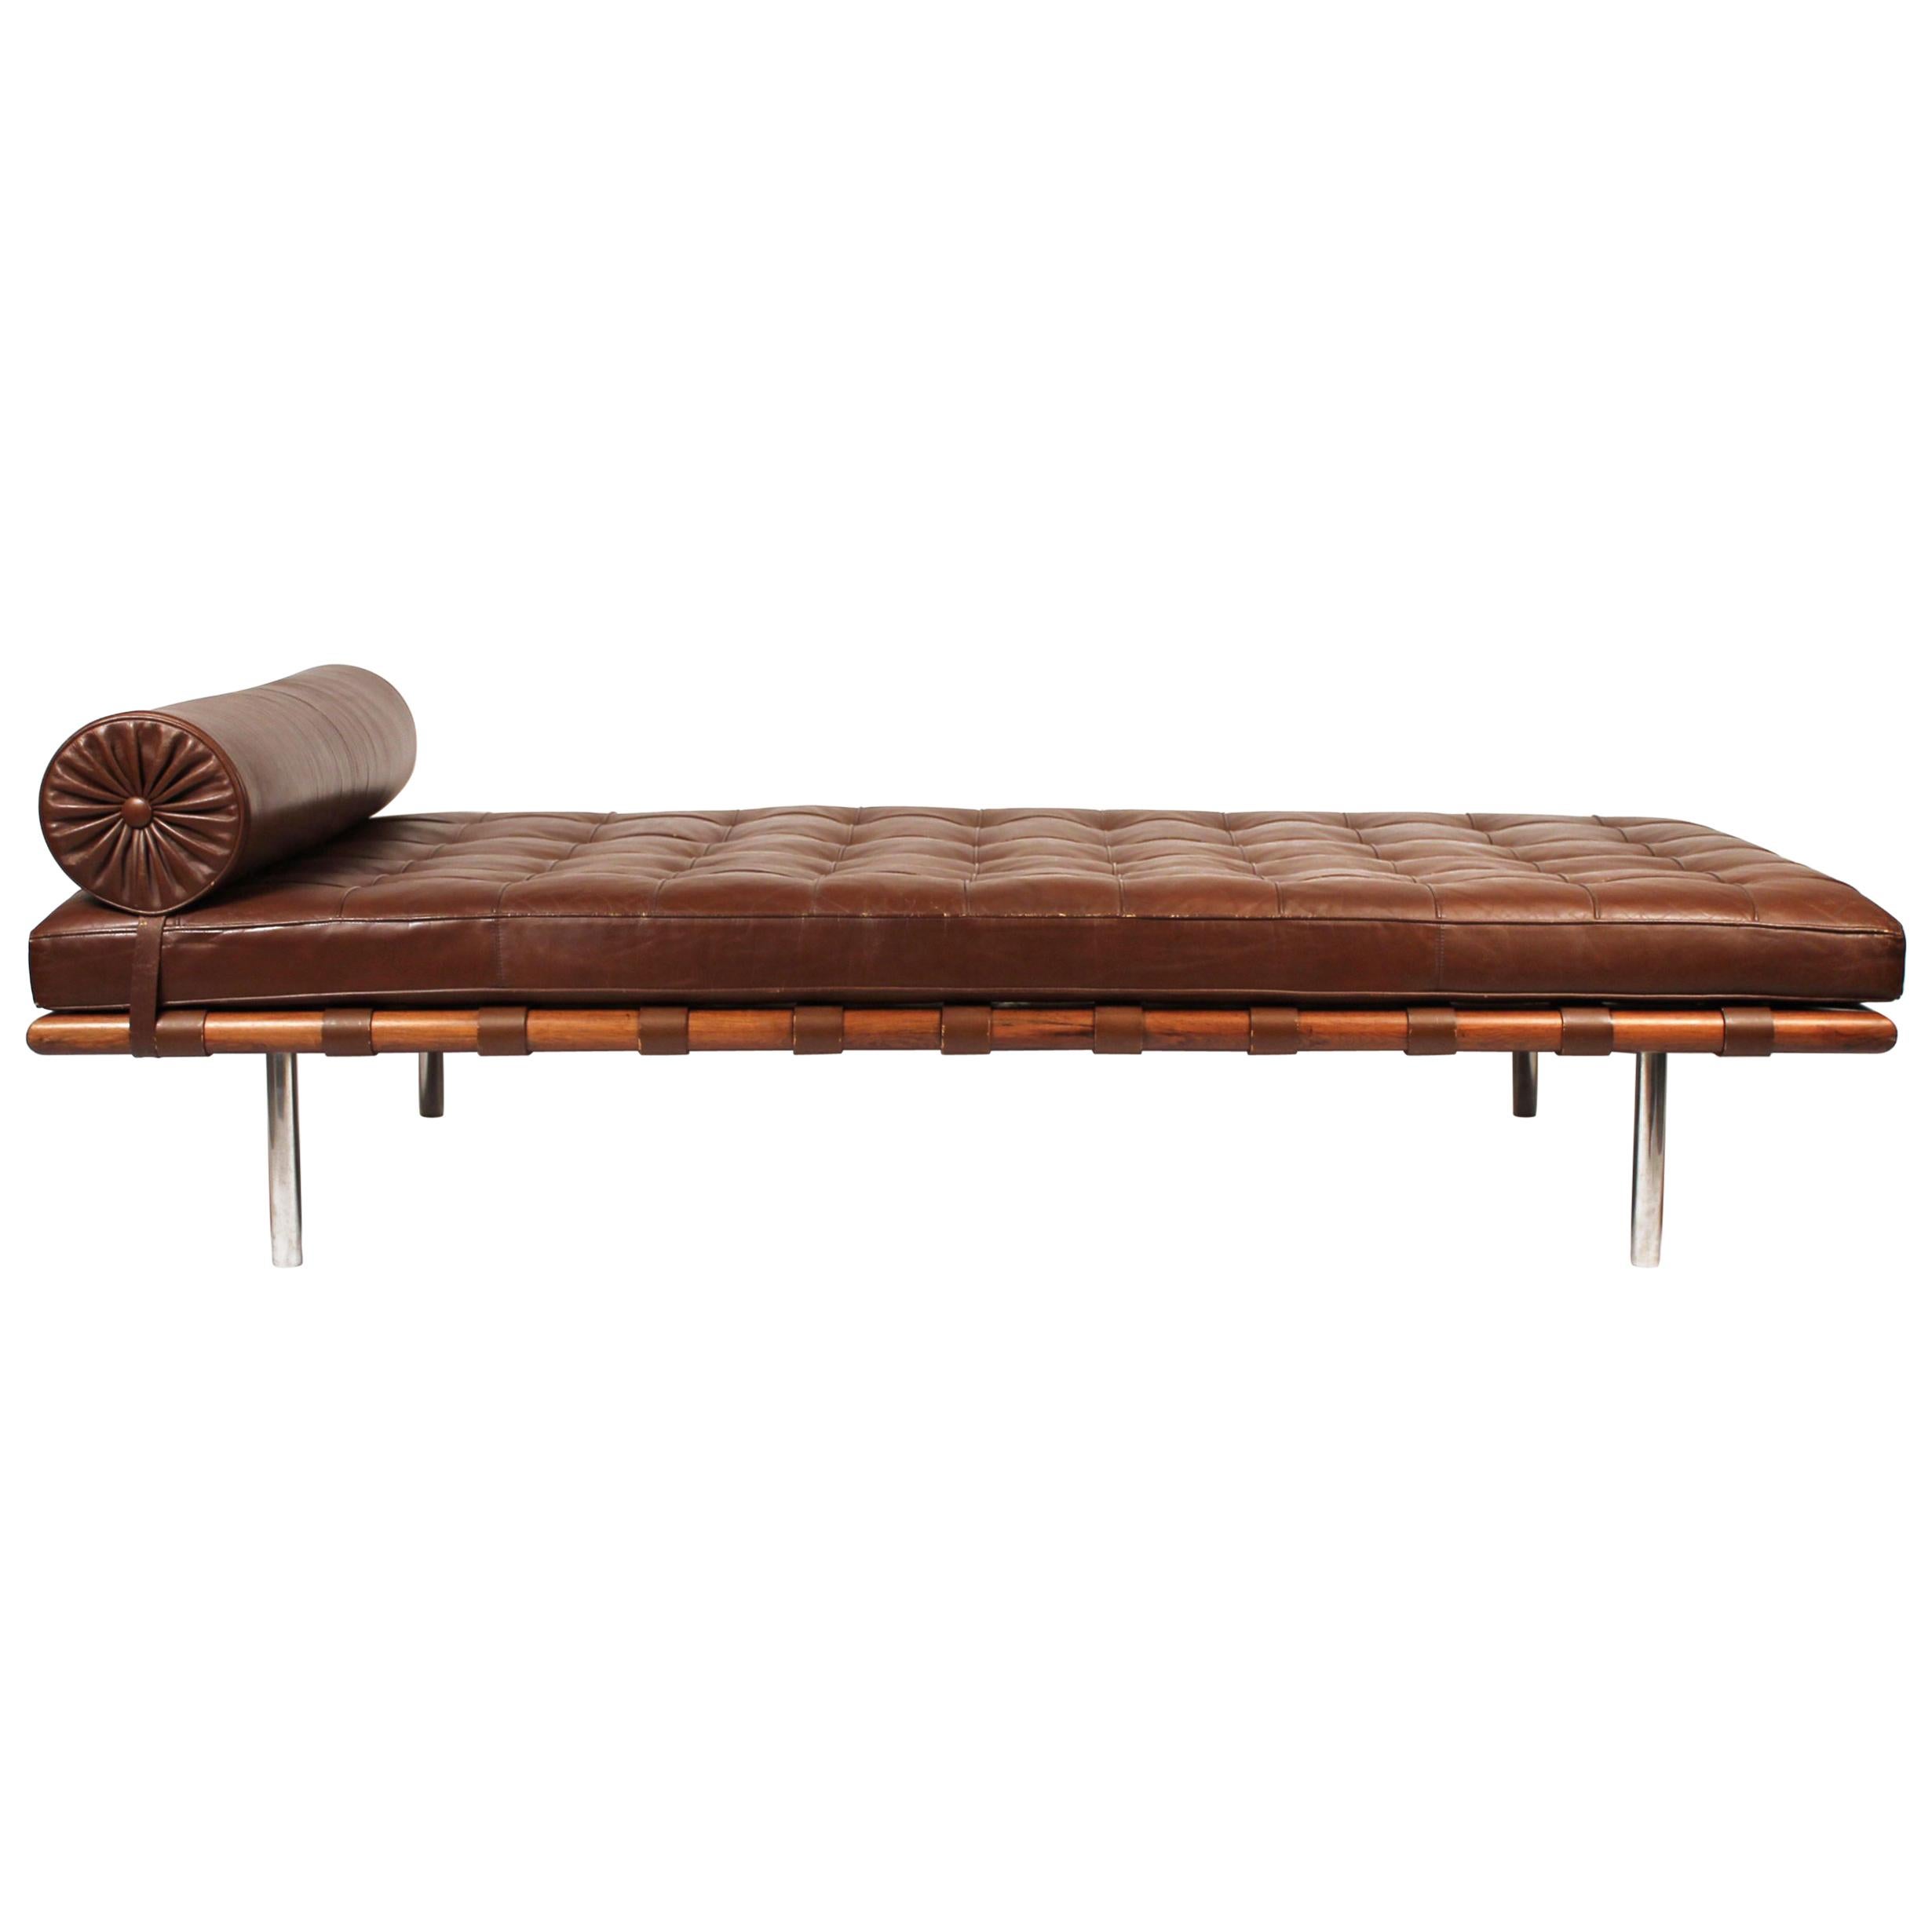 Early Production, Rosewood Daybed designed by Ludwig Mies van der Rohe